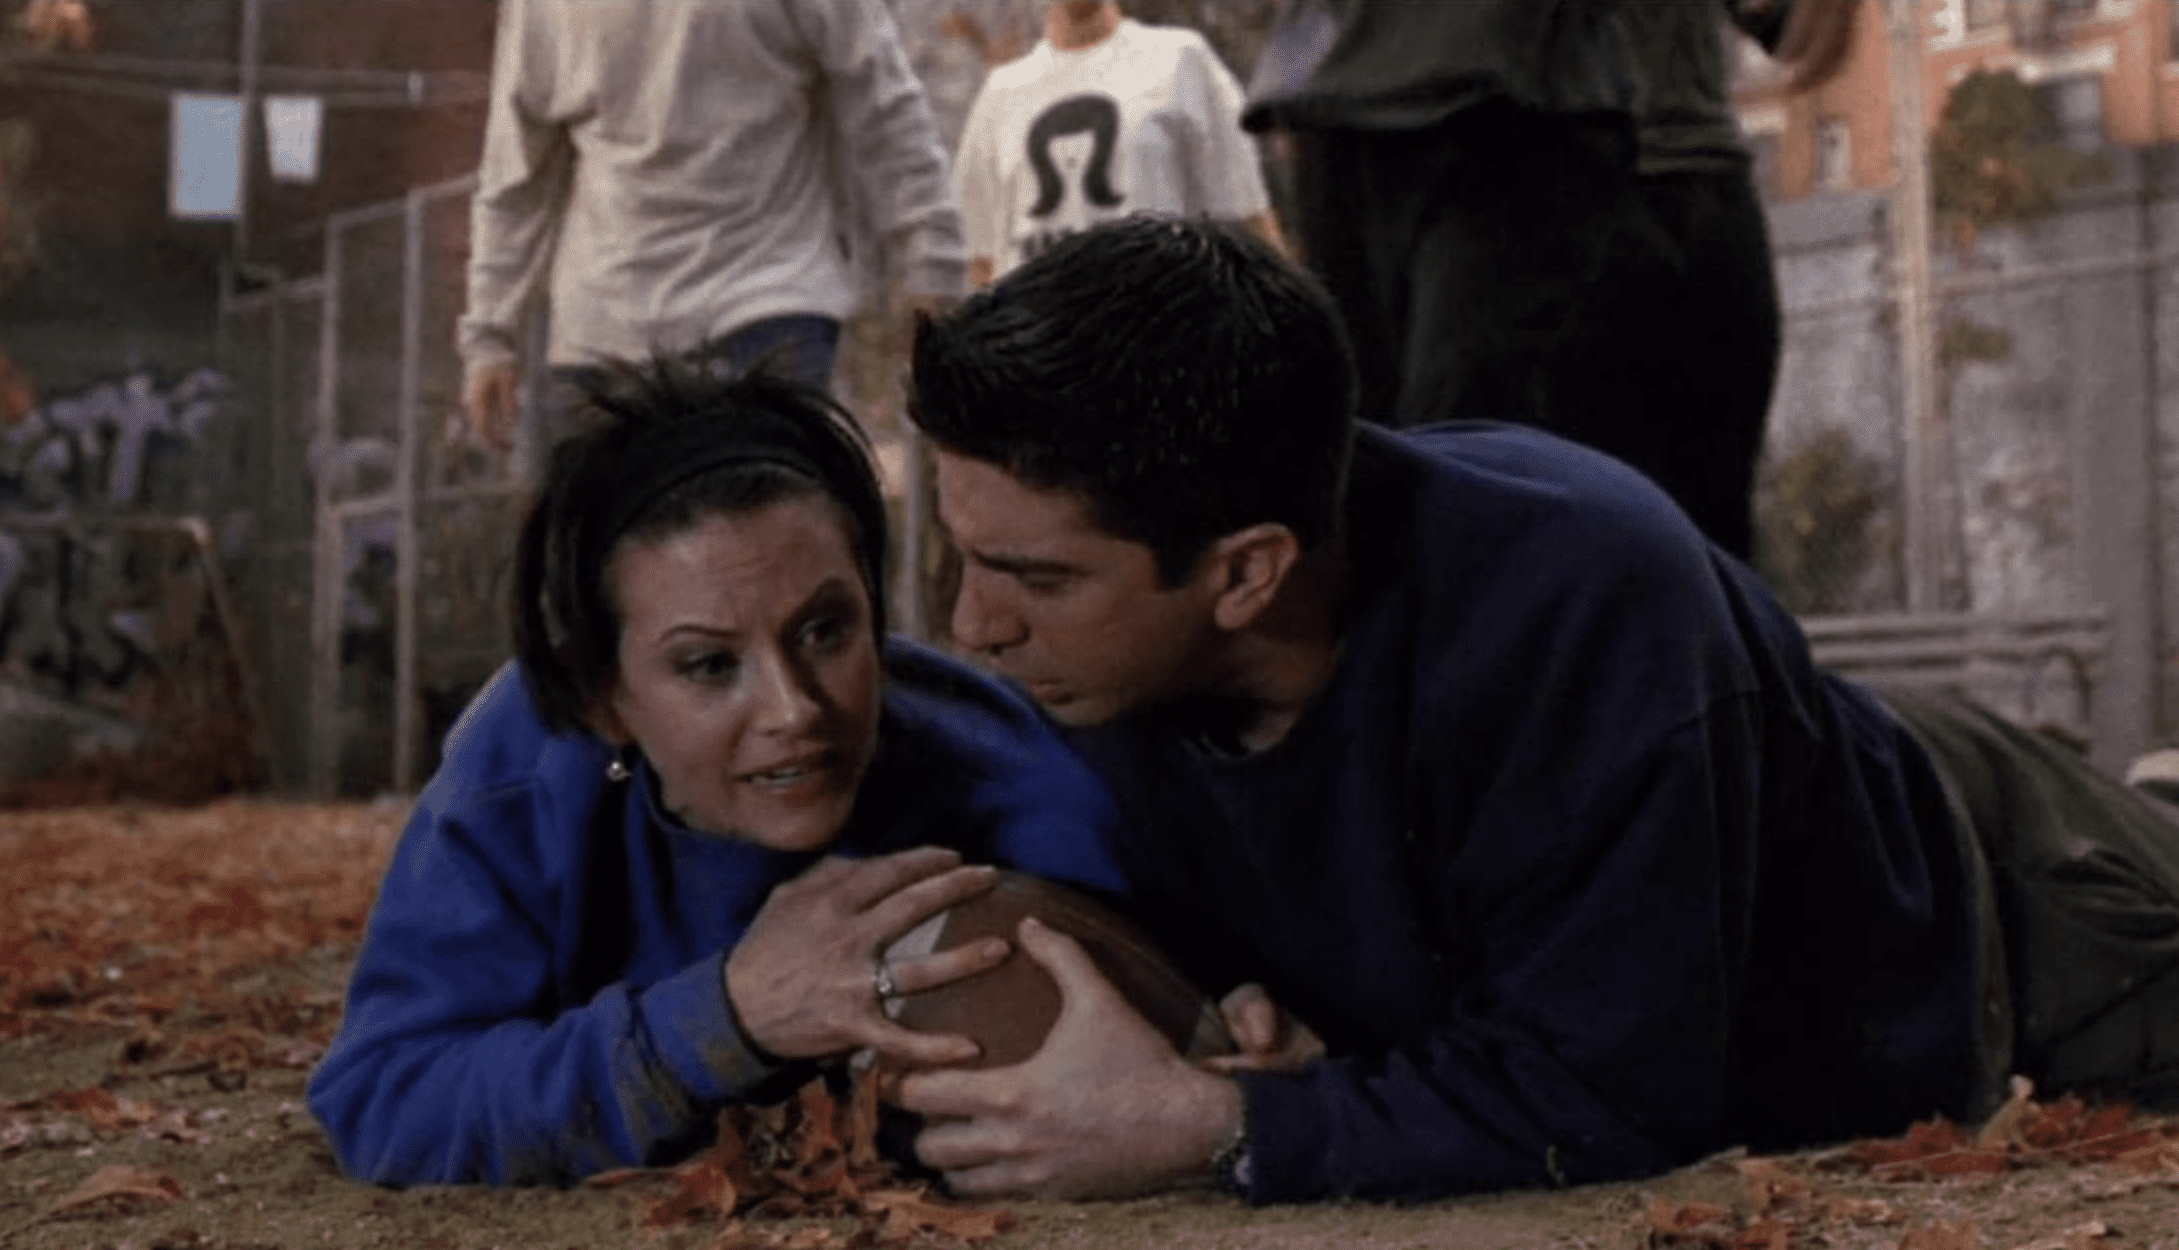 Sibling rivalry gets the best of Monica and Ross, who lay on the ground fighting for a football.